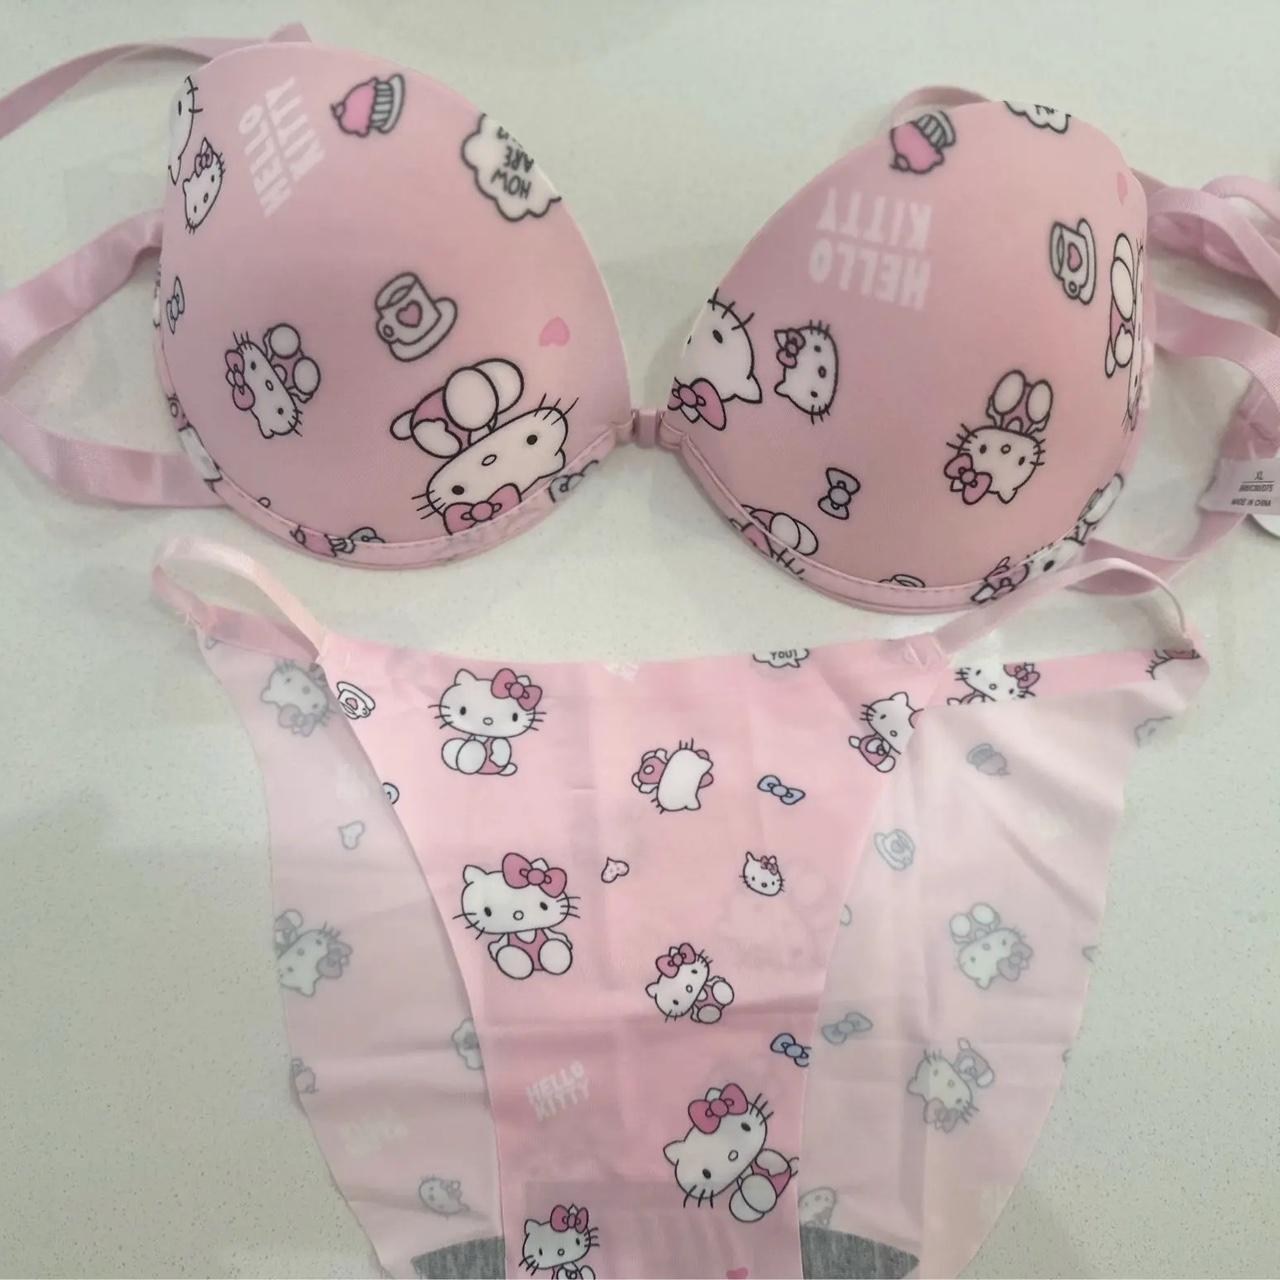 Hello Kitty Bra Set, C cup, Size Small, Brand New, Free